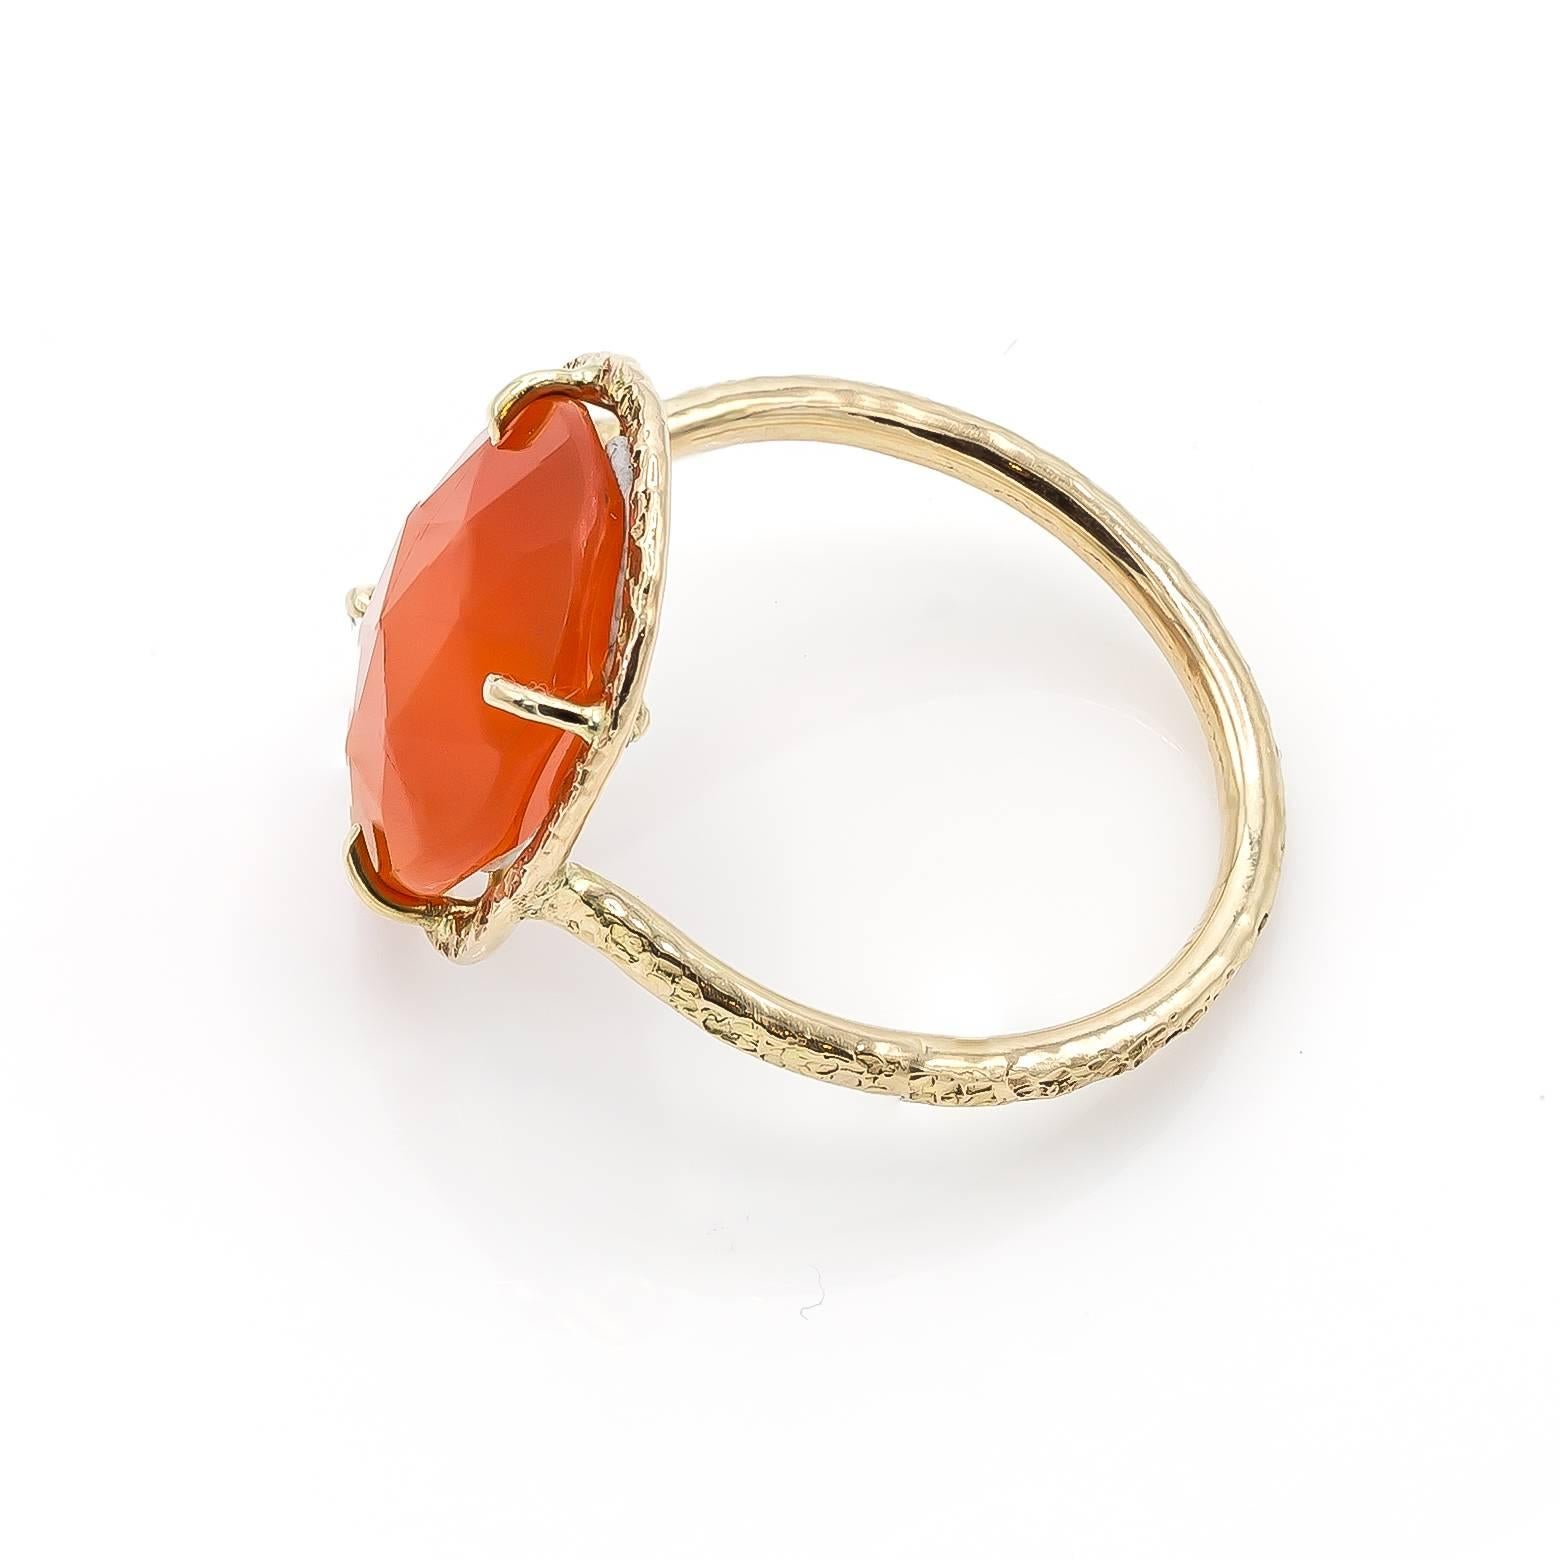 Starburst orange carnelian is surrounded and decorated in an artistic handmade yellow gold band with beautiful texture and style. Handmade in the San Francisco Bay Area this beauty delights, and adds fun and flare to any occasion. This ring is a